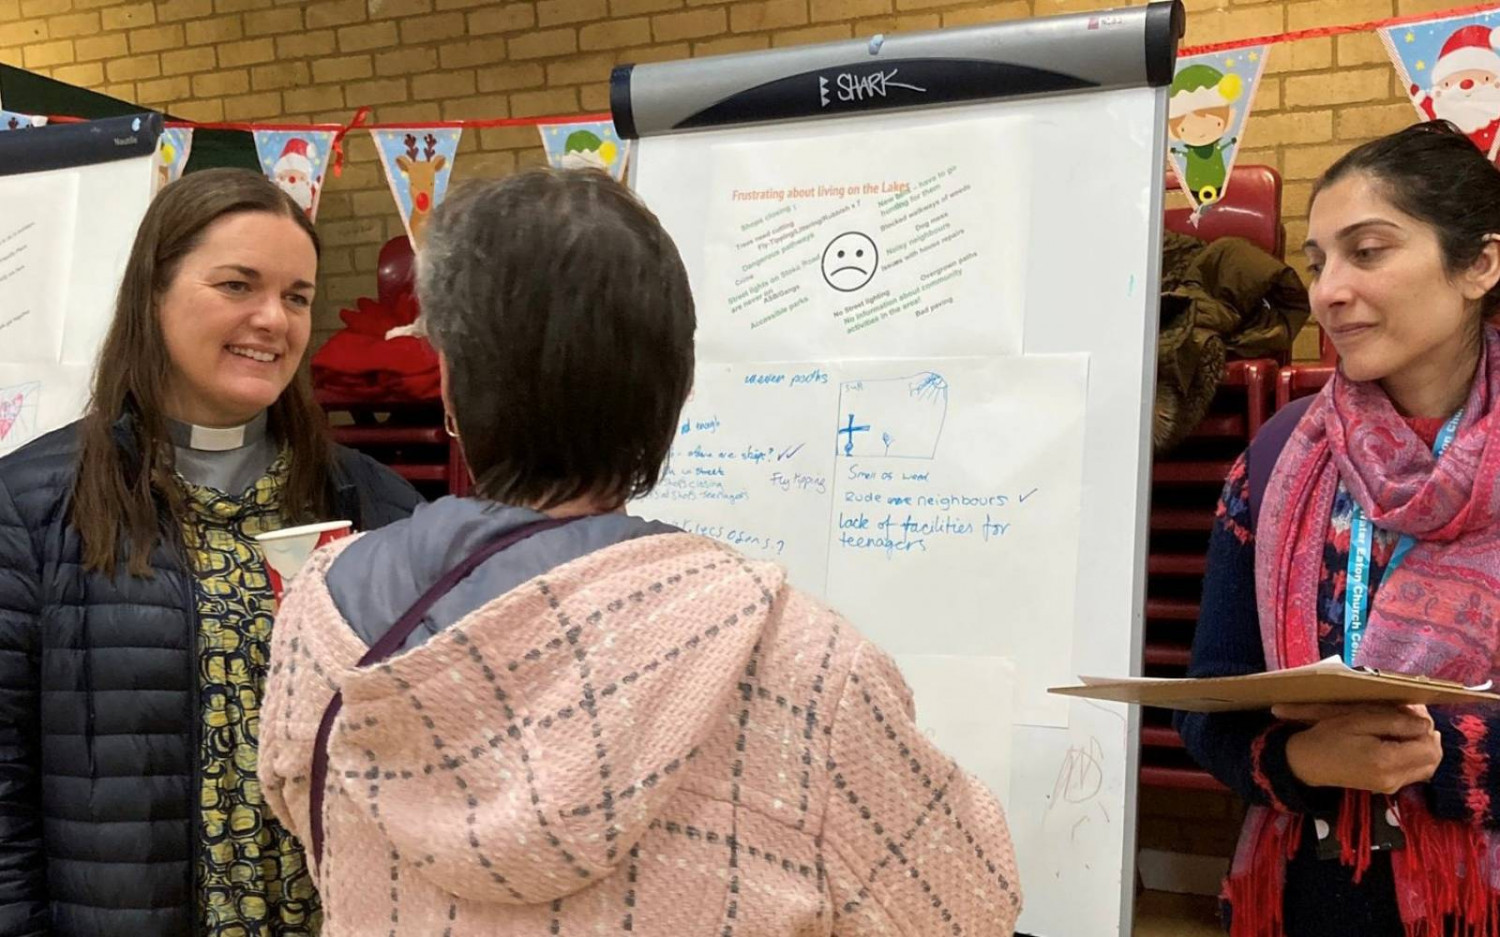 The Revd Catherine Butt and Nudrat Hopper, Community Organising lead, speaking to a local resident infront of a flipchart representing residents views.